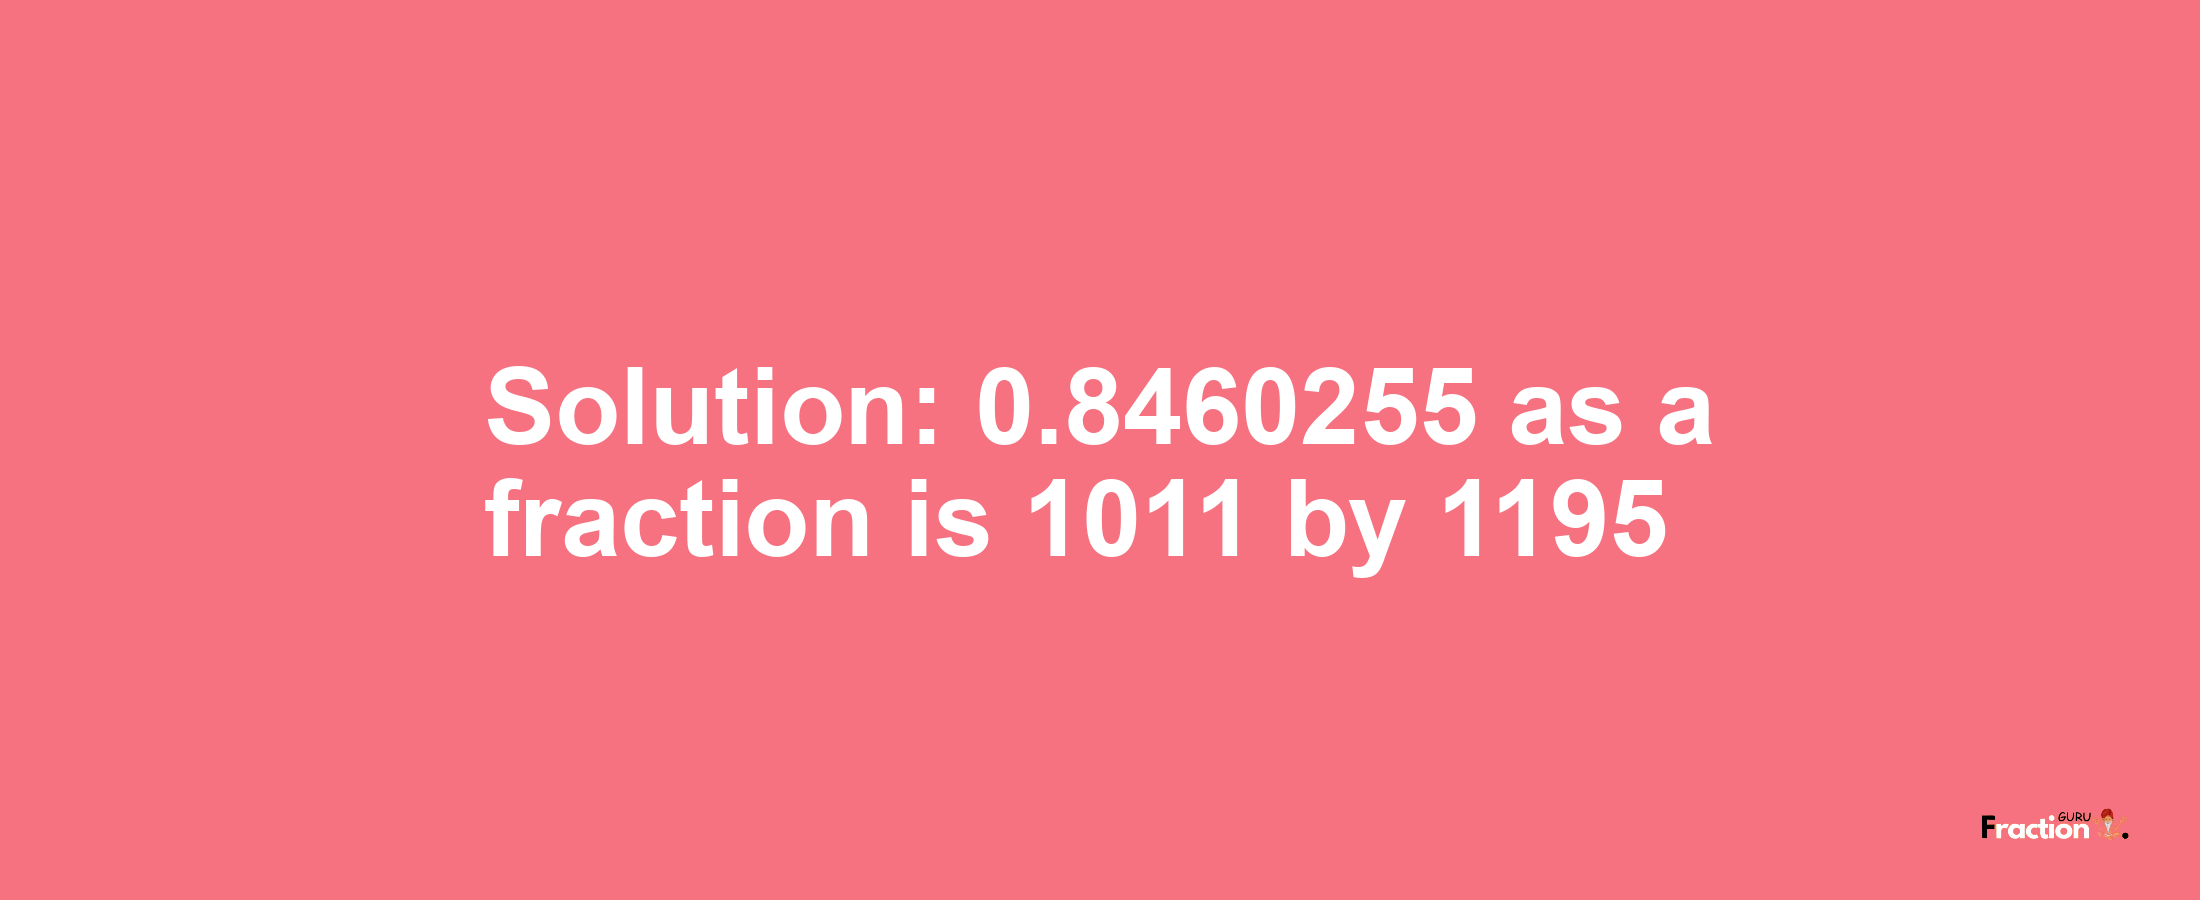 Solution:0.8460255 as a fraction is 1011/1195